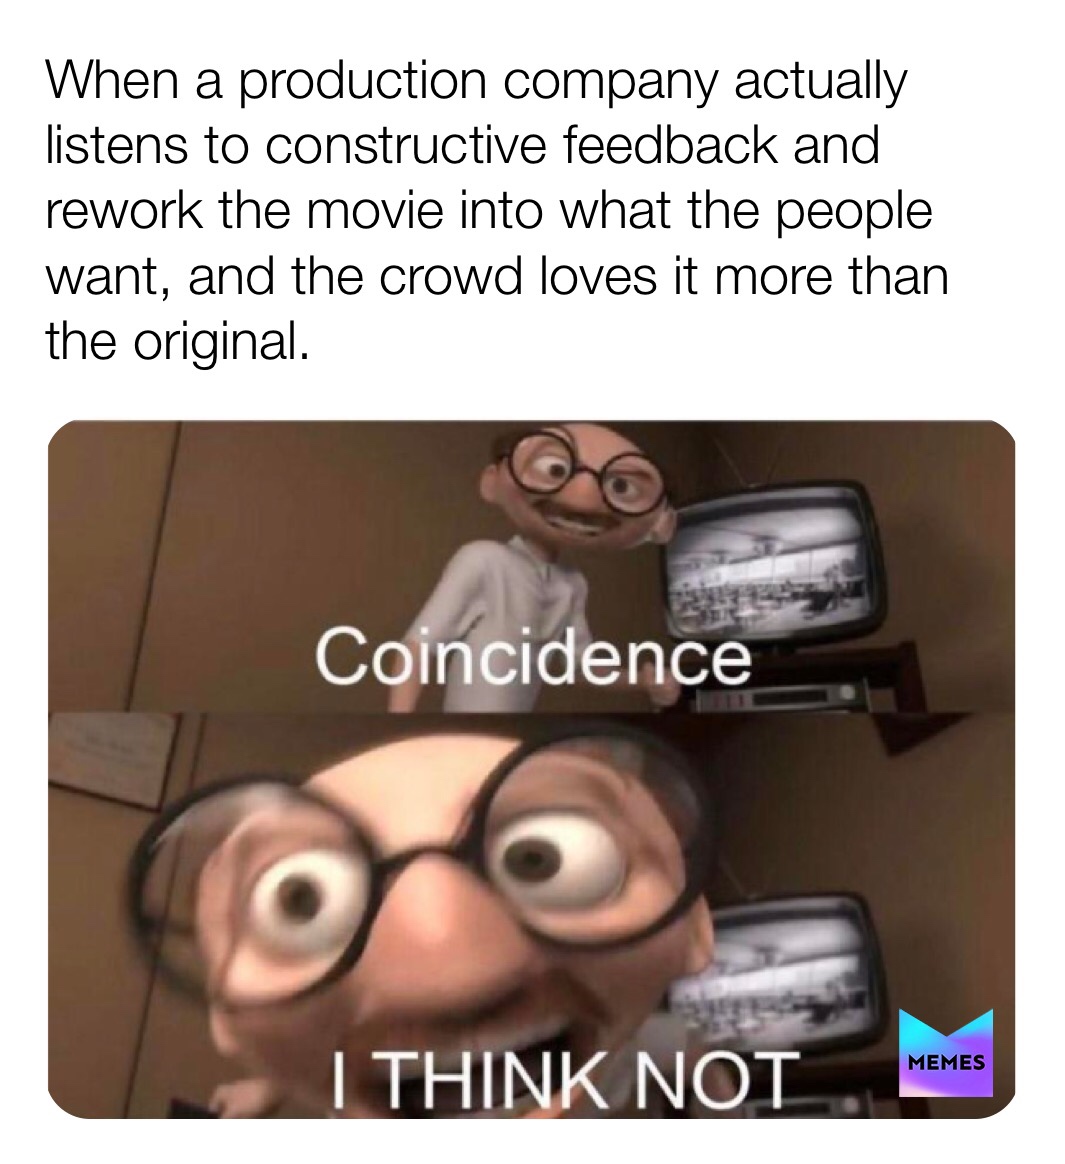 jurgen klopp pewdiepie - When a production company actually listens to constructive feedback and rework the movie into what the people want, and the crowd loves it more than the original. Coincidence Memes I Think Not. Es